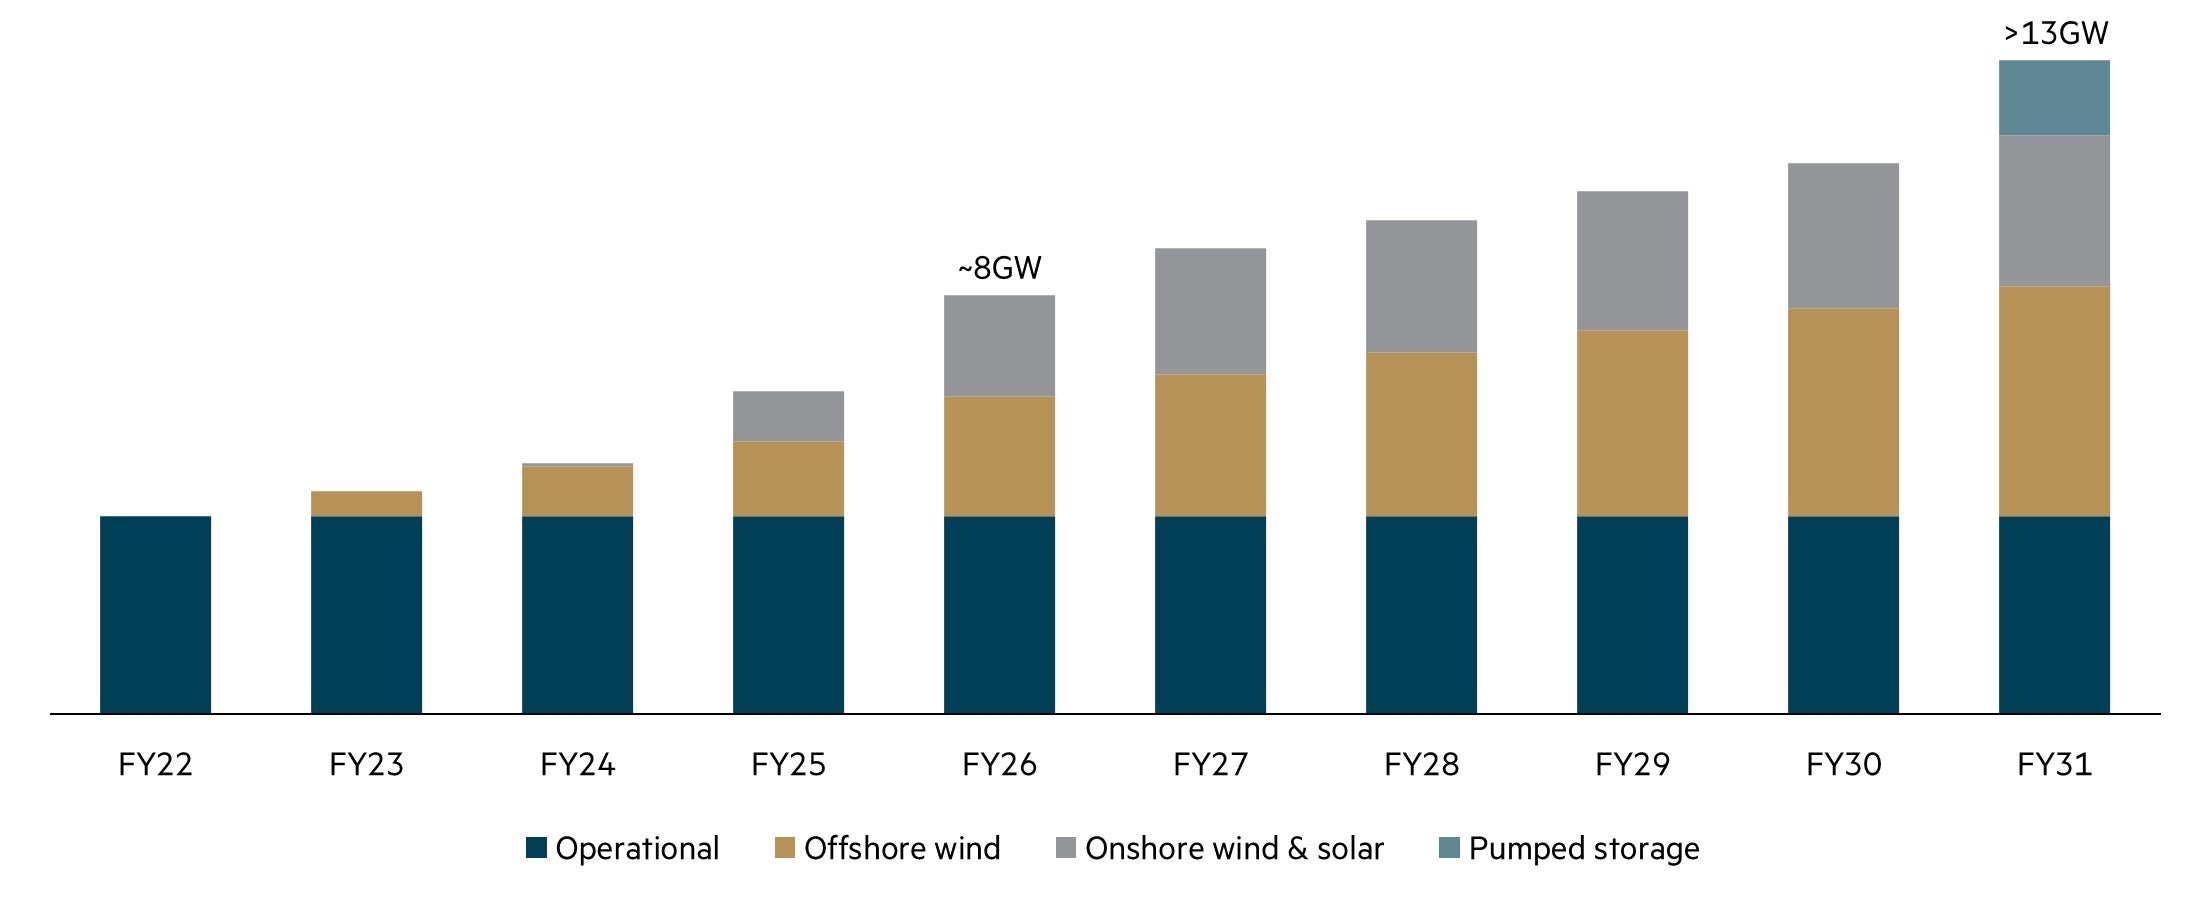 New renewable generation capacity additions targeted to FY31